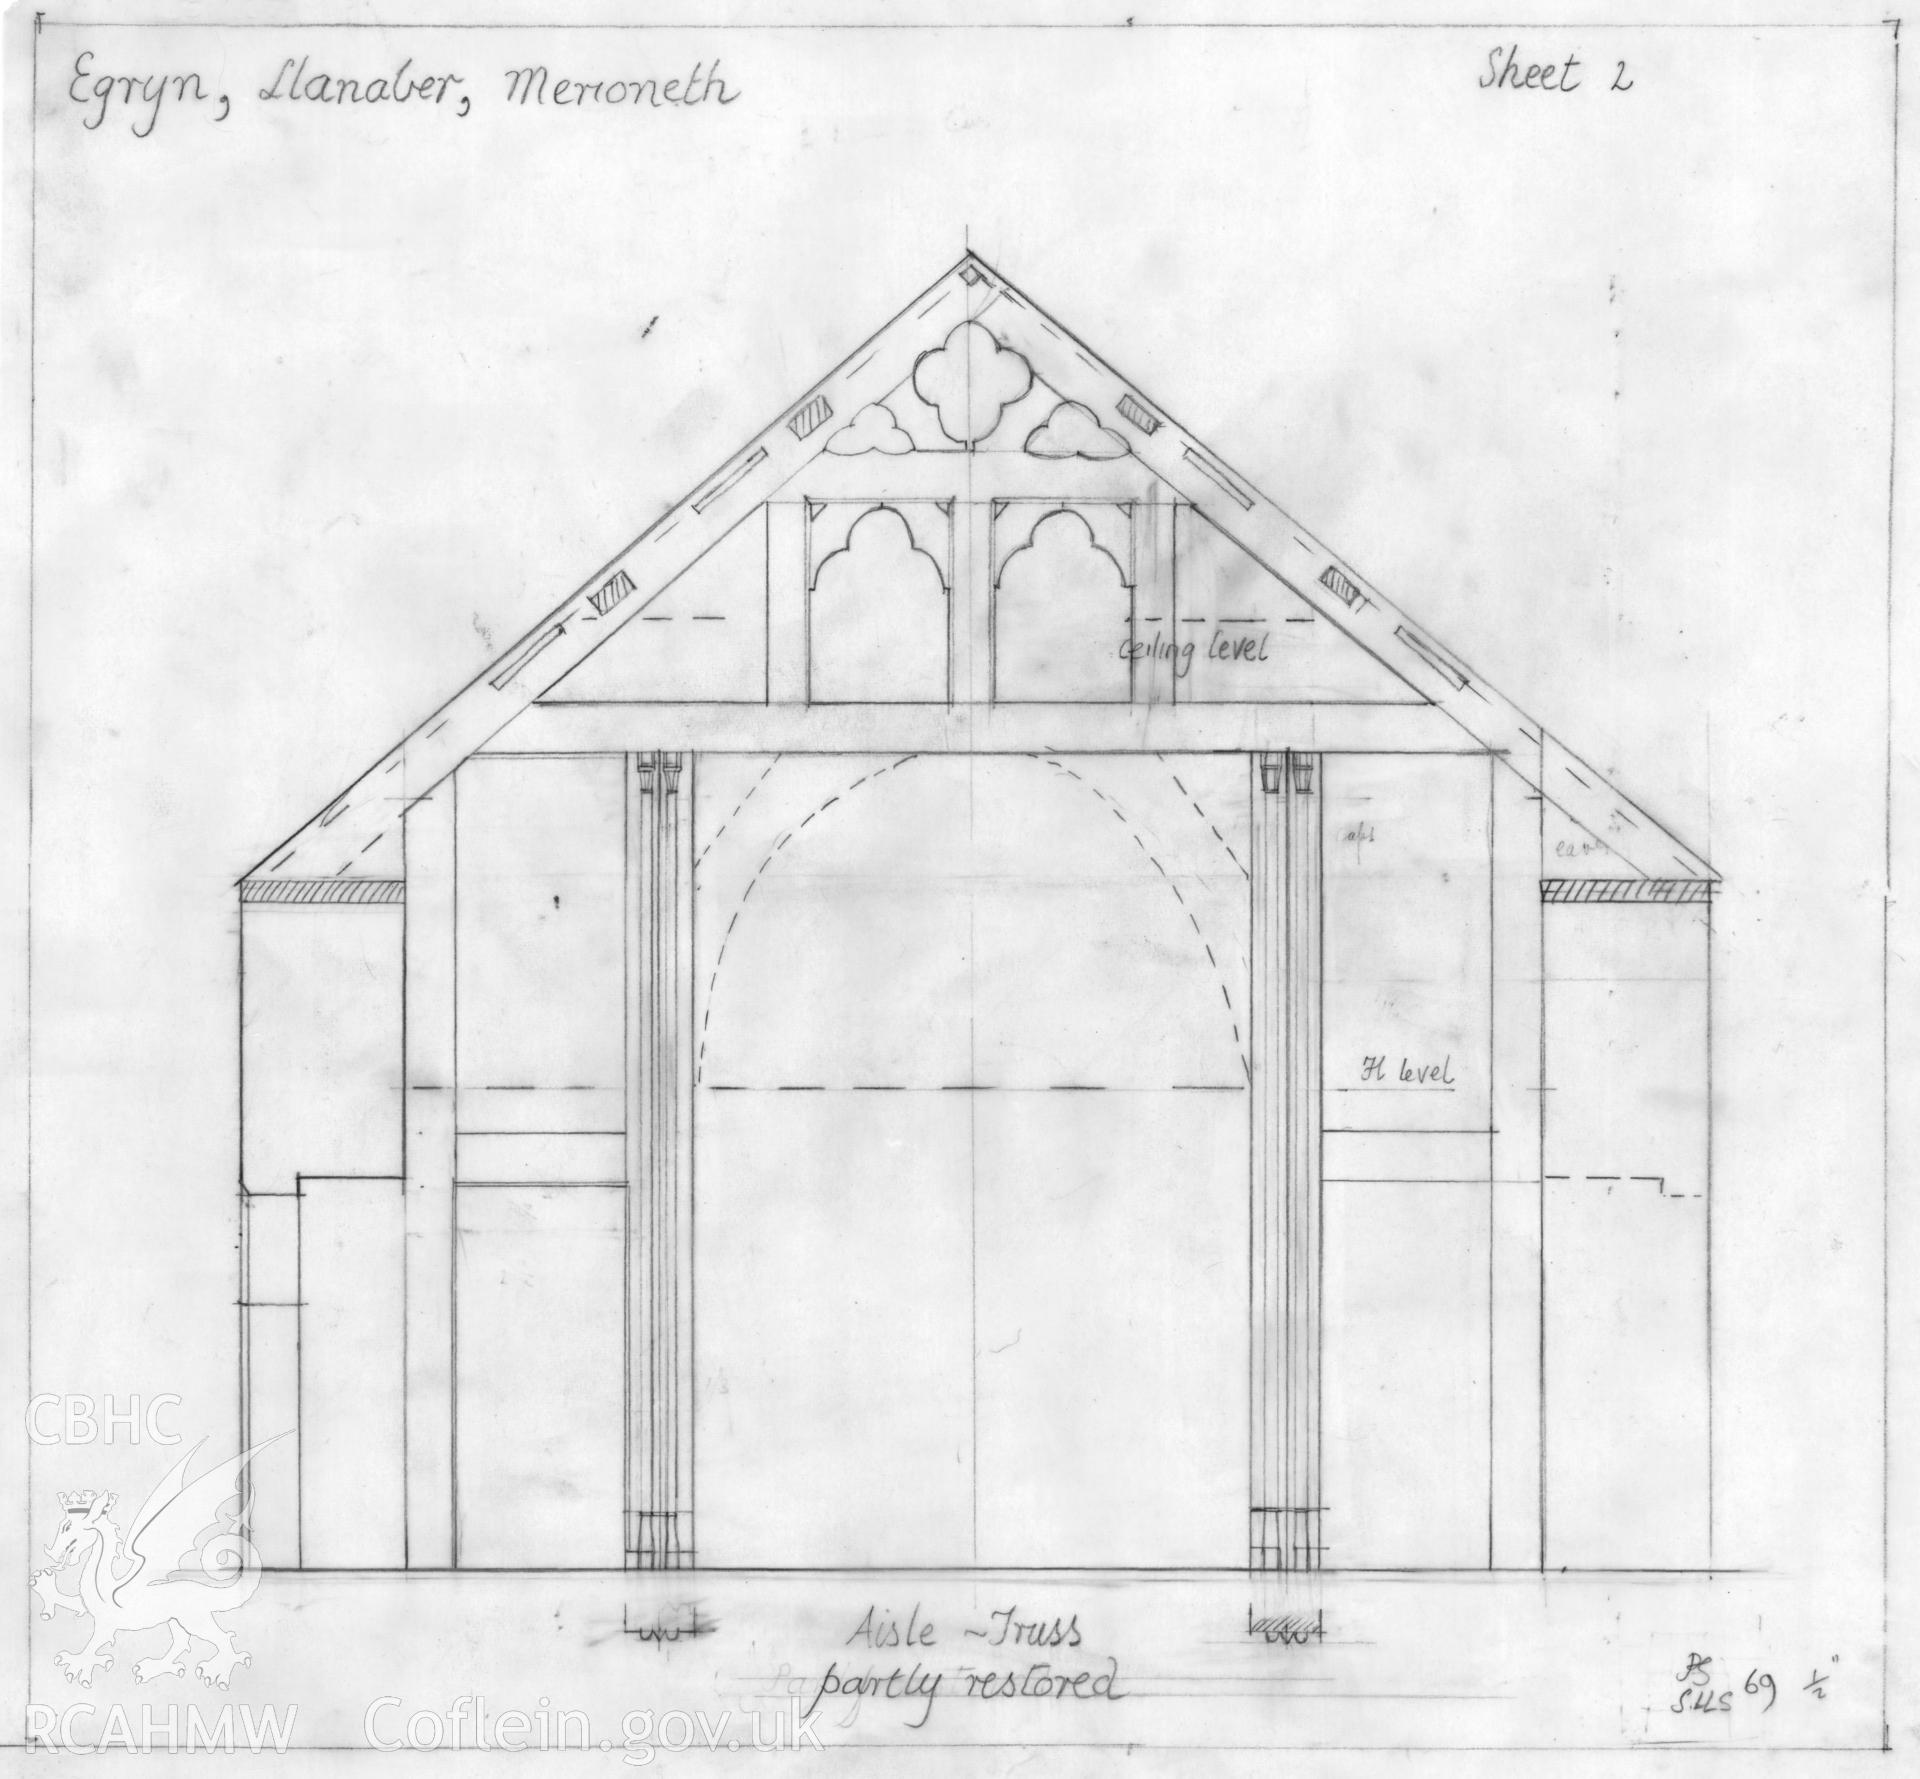 RCAHMW drawing showing section of aisle truss at Egryn Abbey.